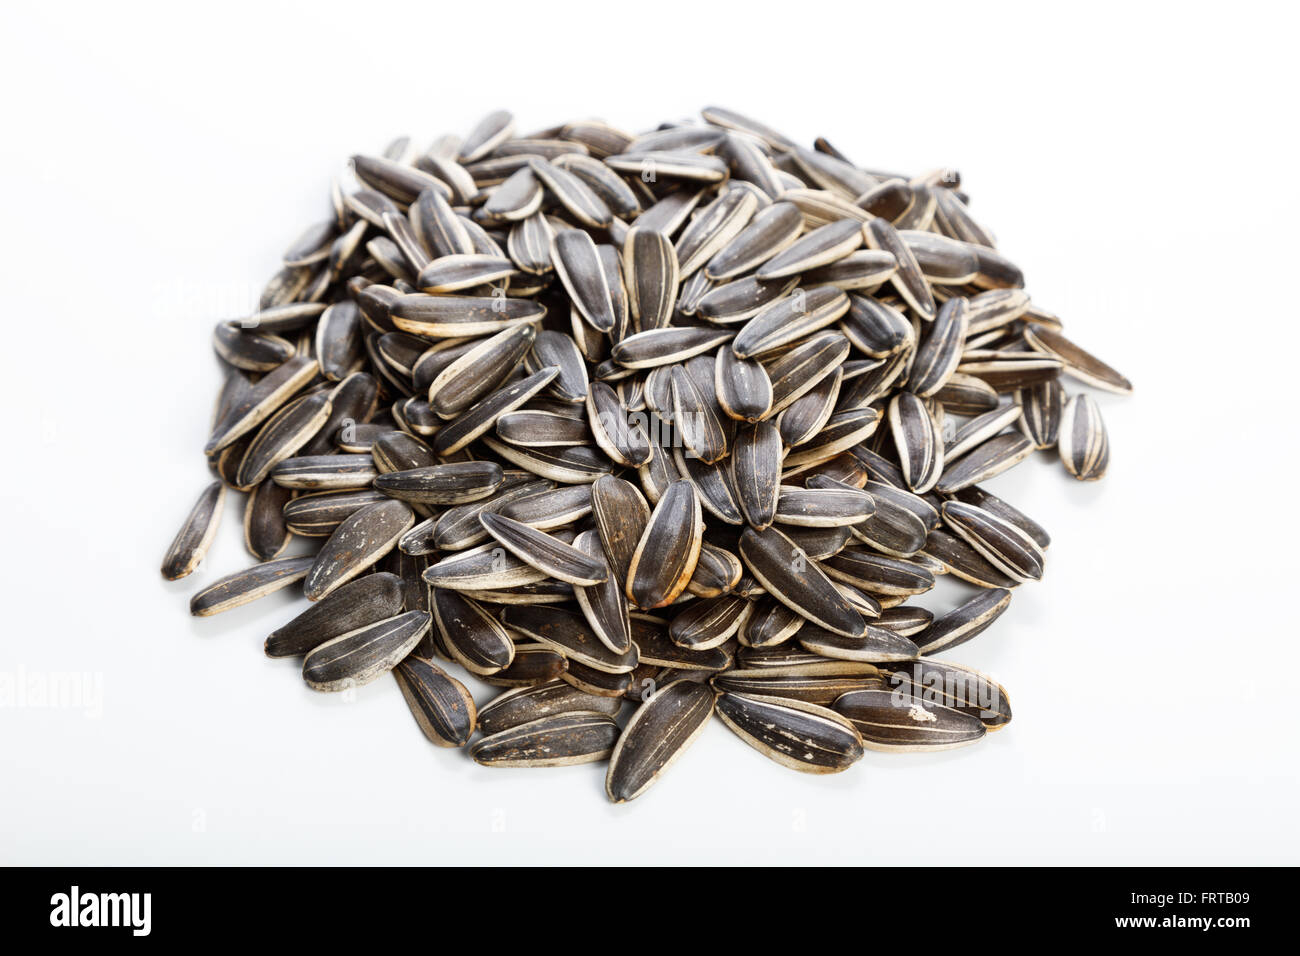 Sunflower seeds, food ingredient with white background. Stock Photo